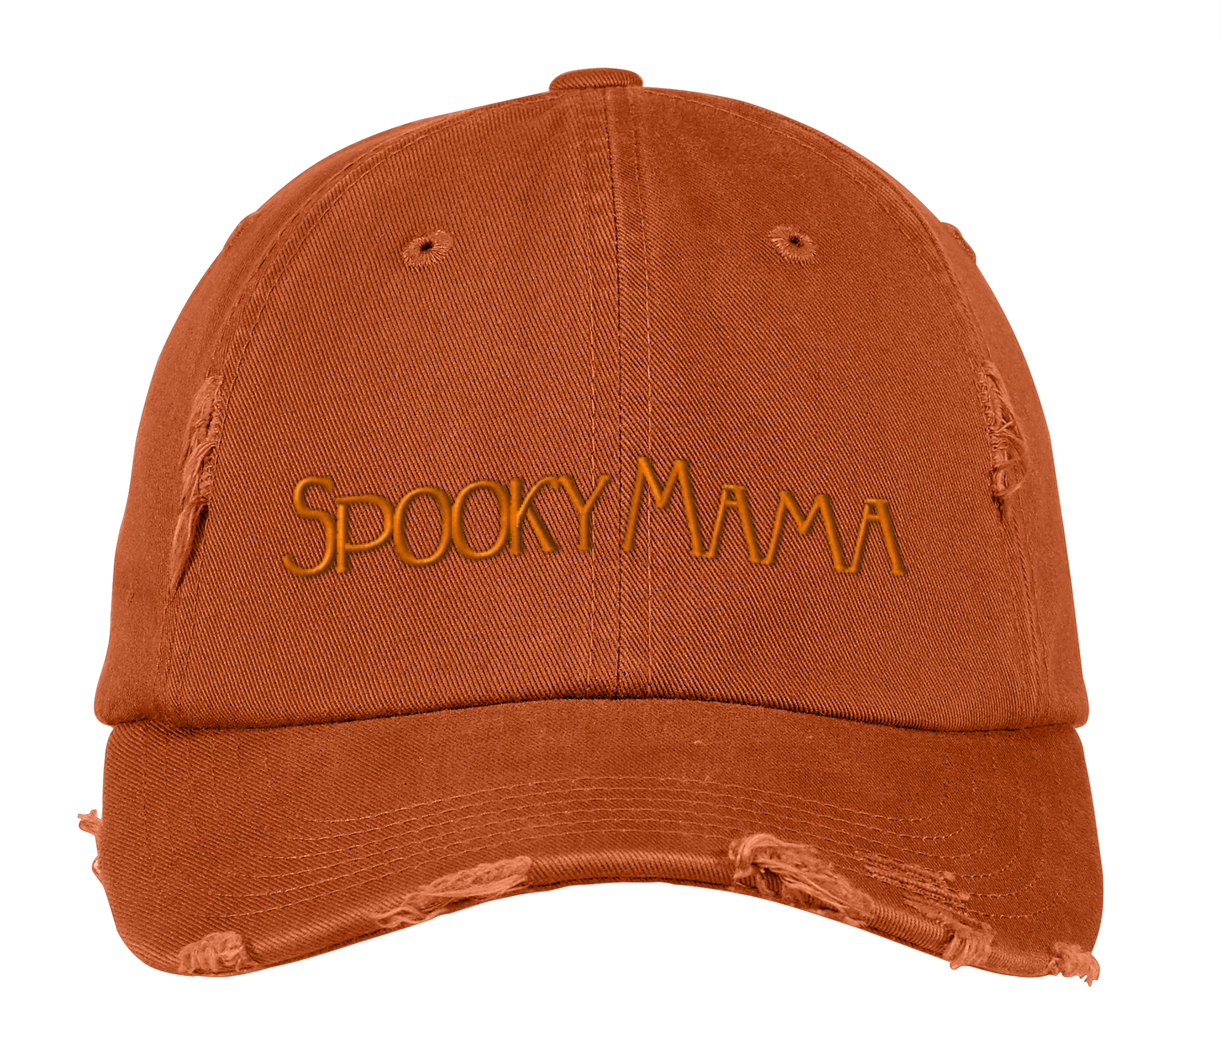 Spooky Mama Embroidered Distressed Twill Cap